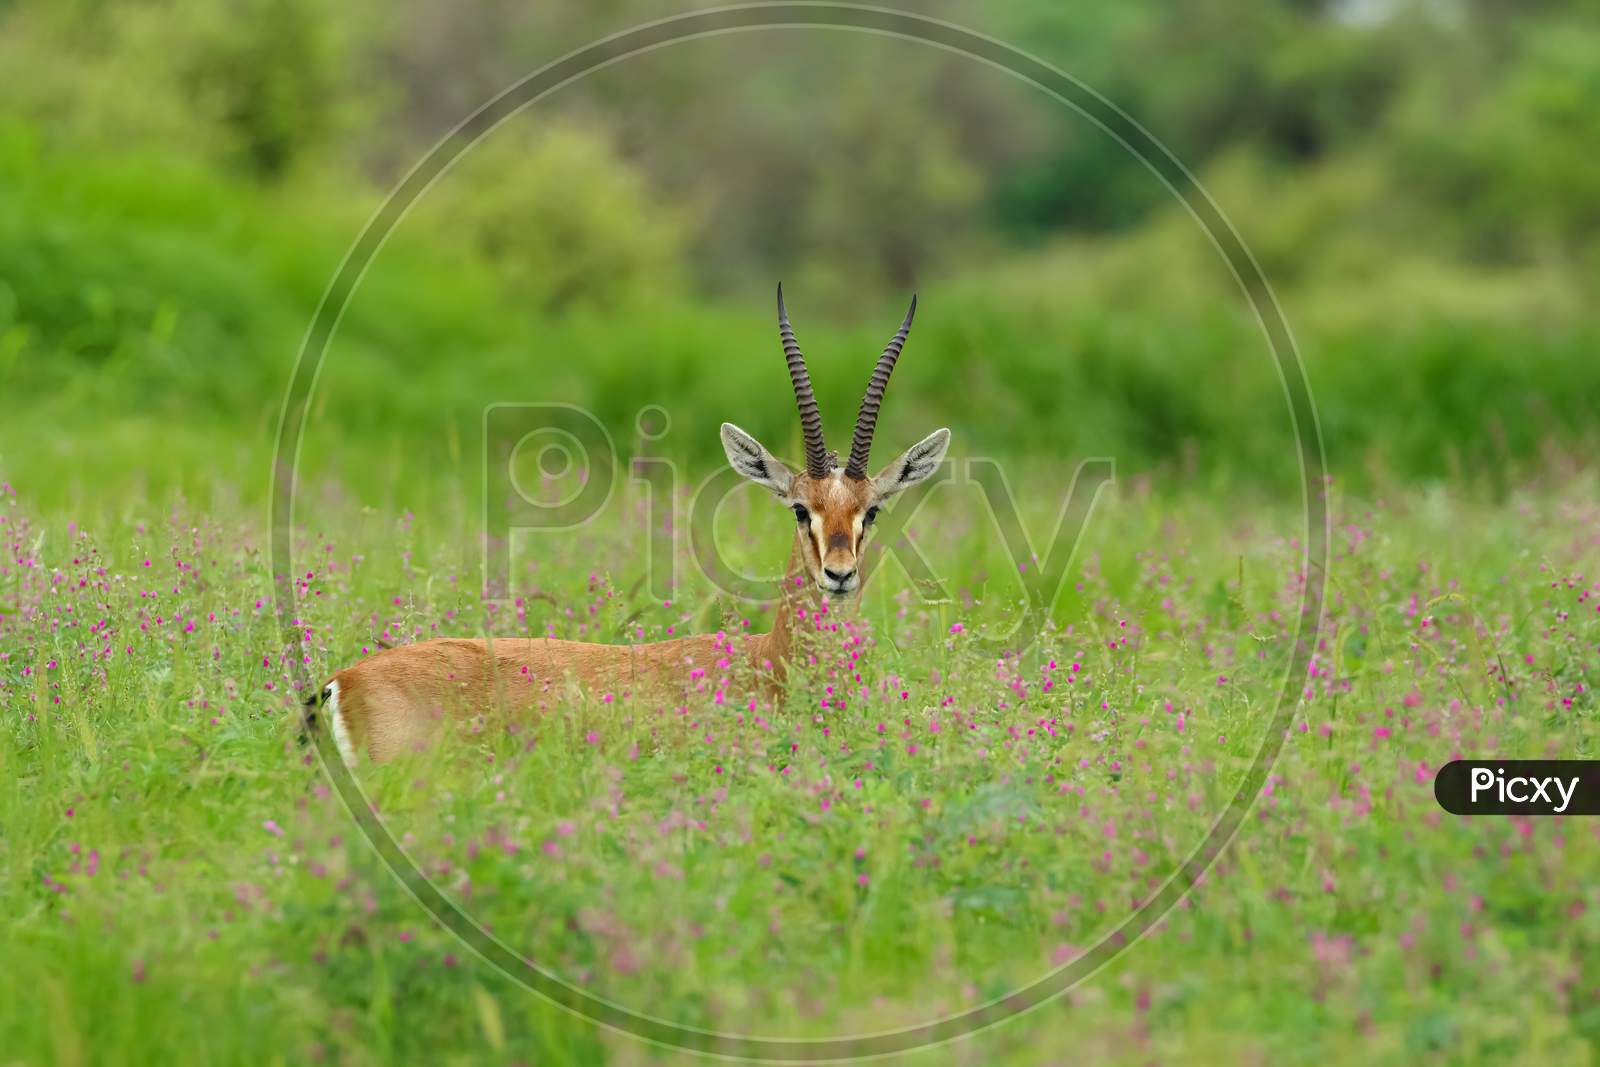 A Chinkara standing amidst grass and wild flowers